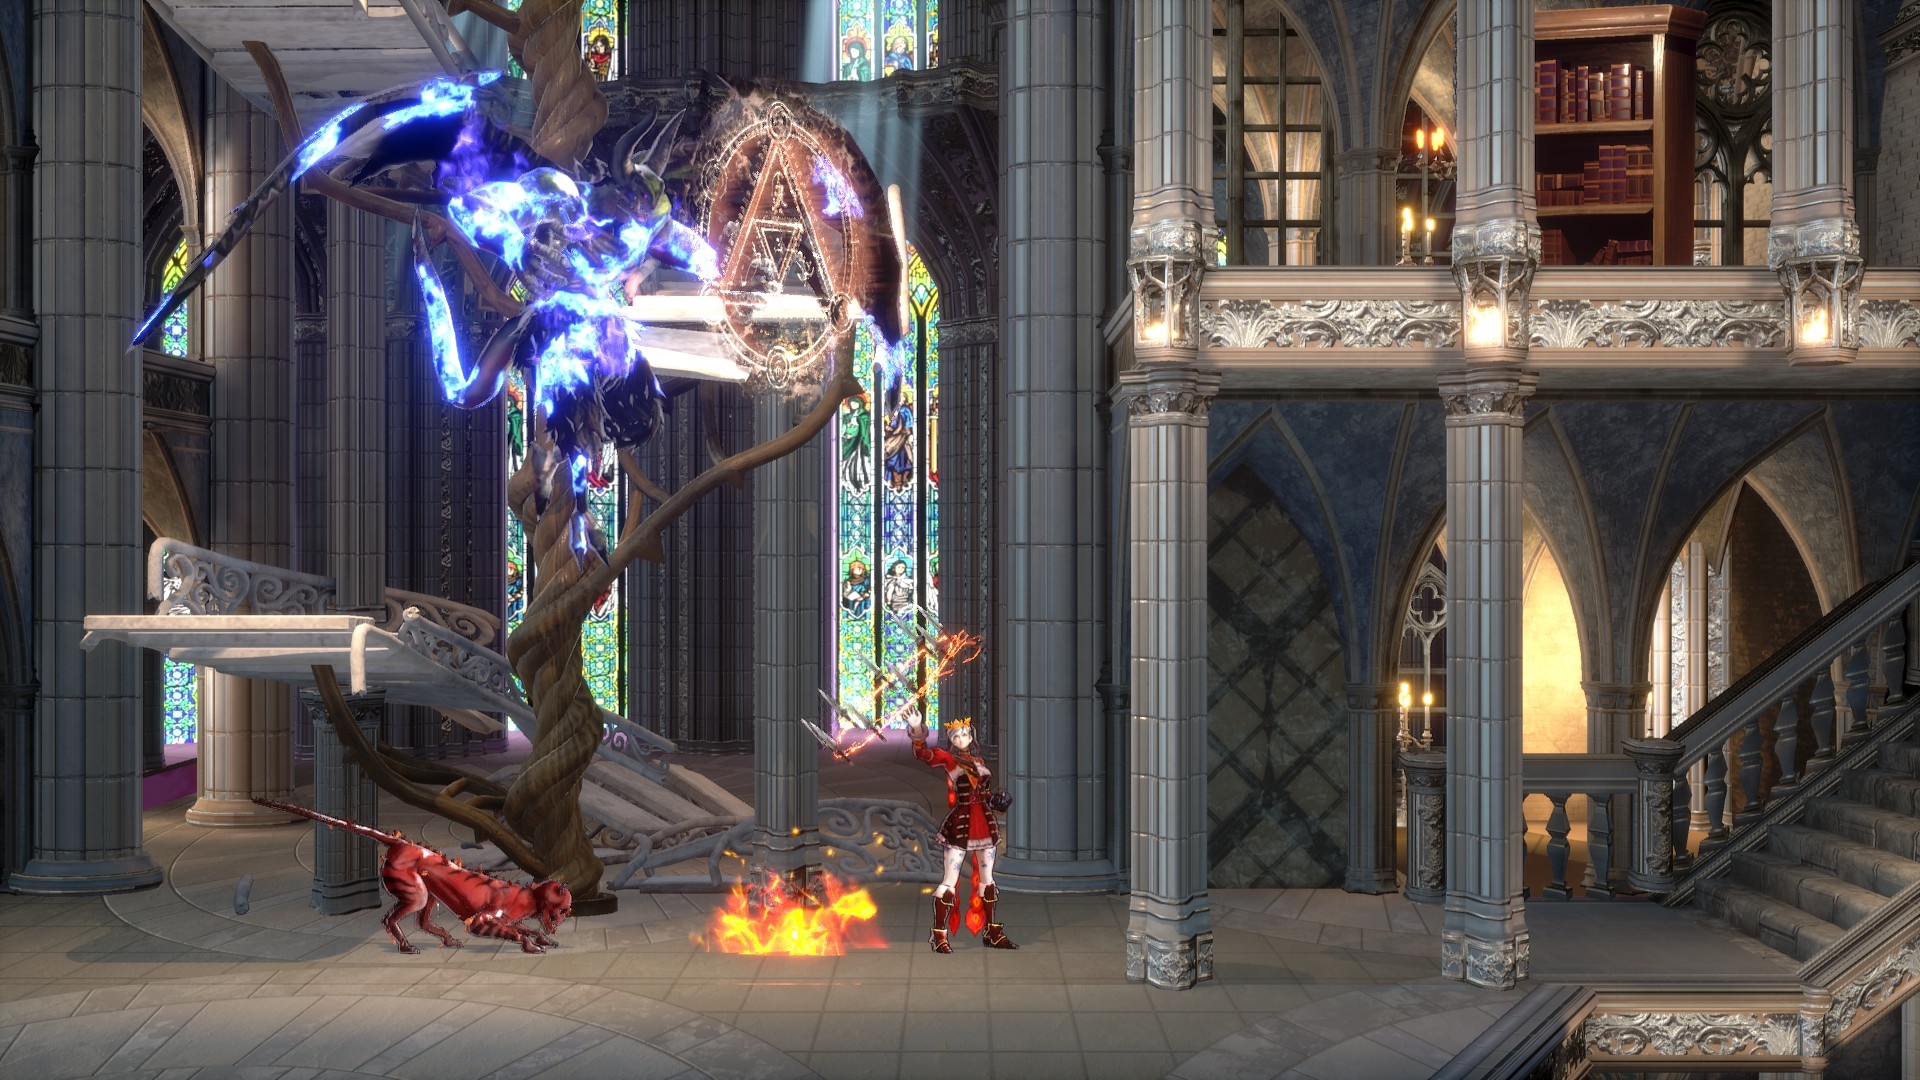 Bloodstained: Ritual of the Night | MA-ASIA 1 (17d9a765-711e-4ee4-9593-60c10b428003)